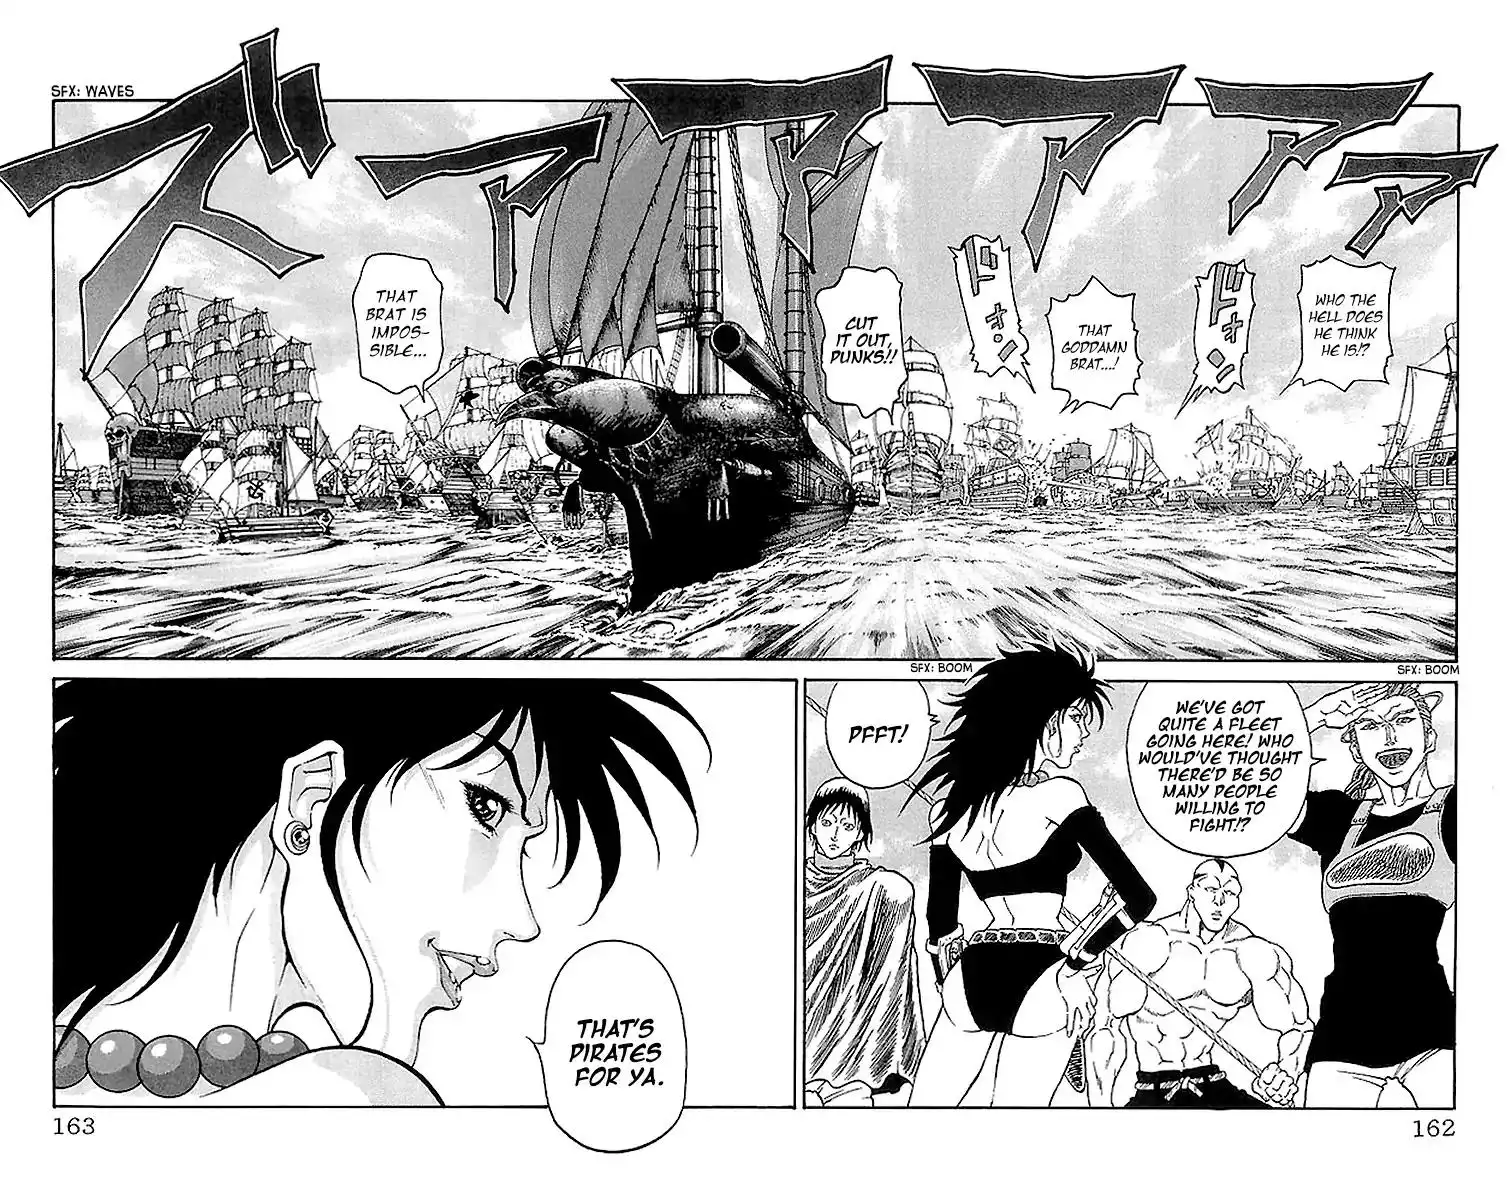 Full Ahead! Coco Chapter 221